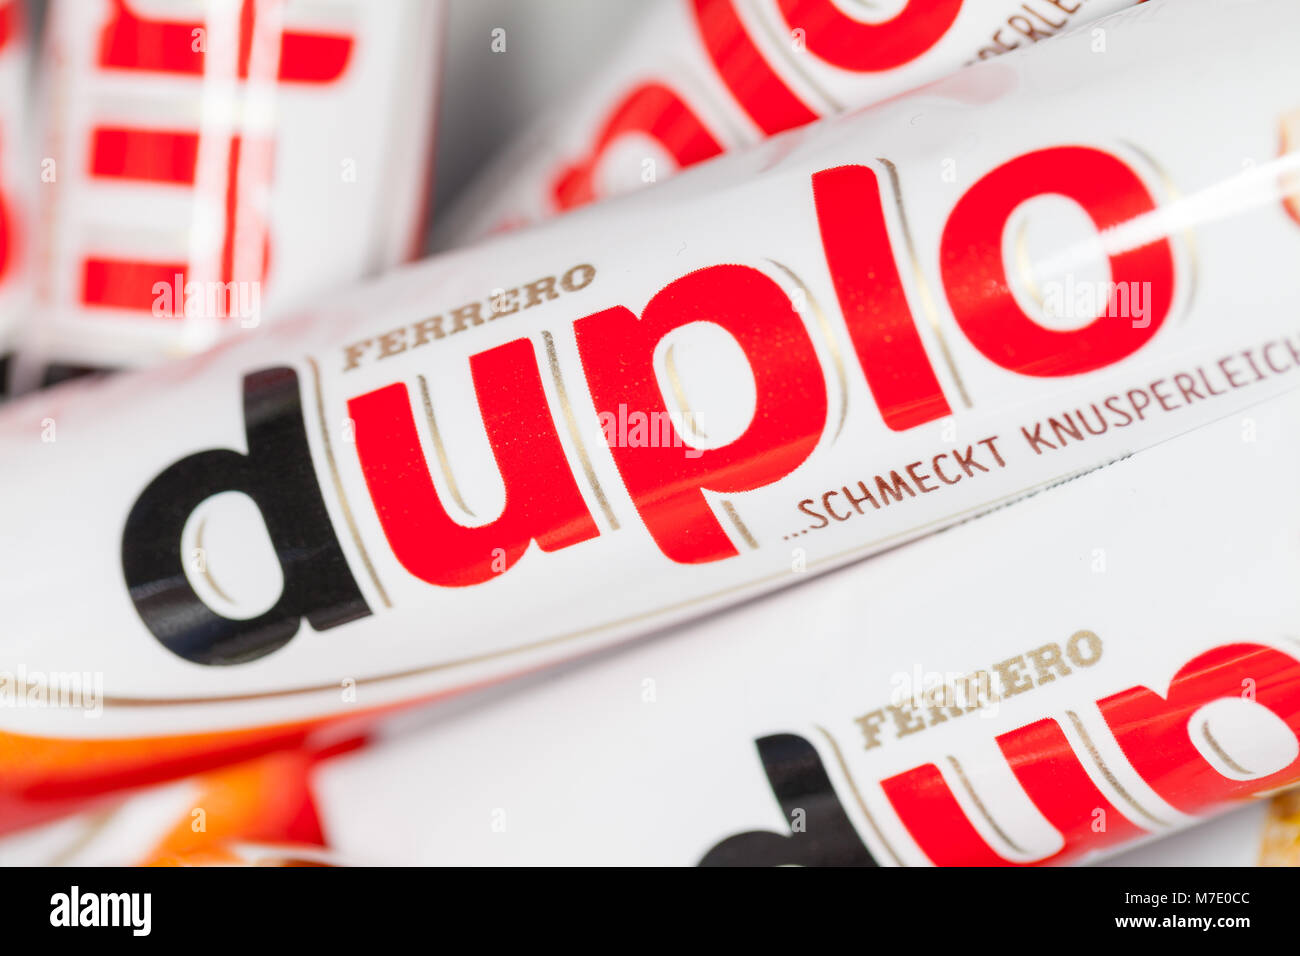 FUERTH / GERMANY - MARCH 3, 2018: Duplo bars lies in a bowl. Duplo produced by Ferrero which was founded  in 1946. Stock Photo